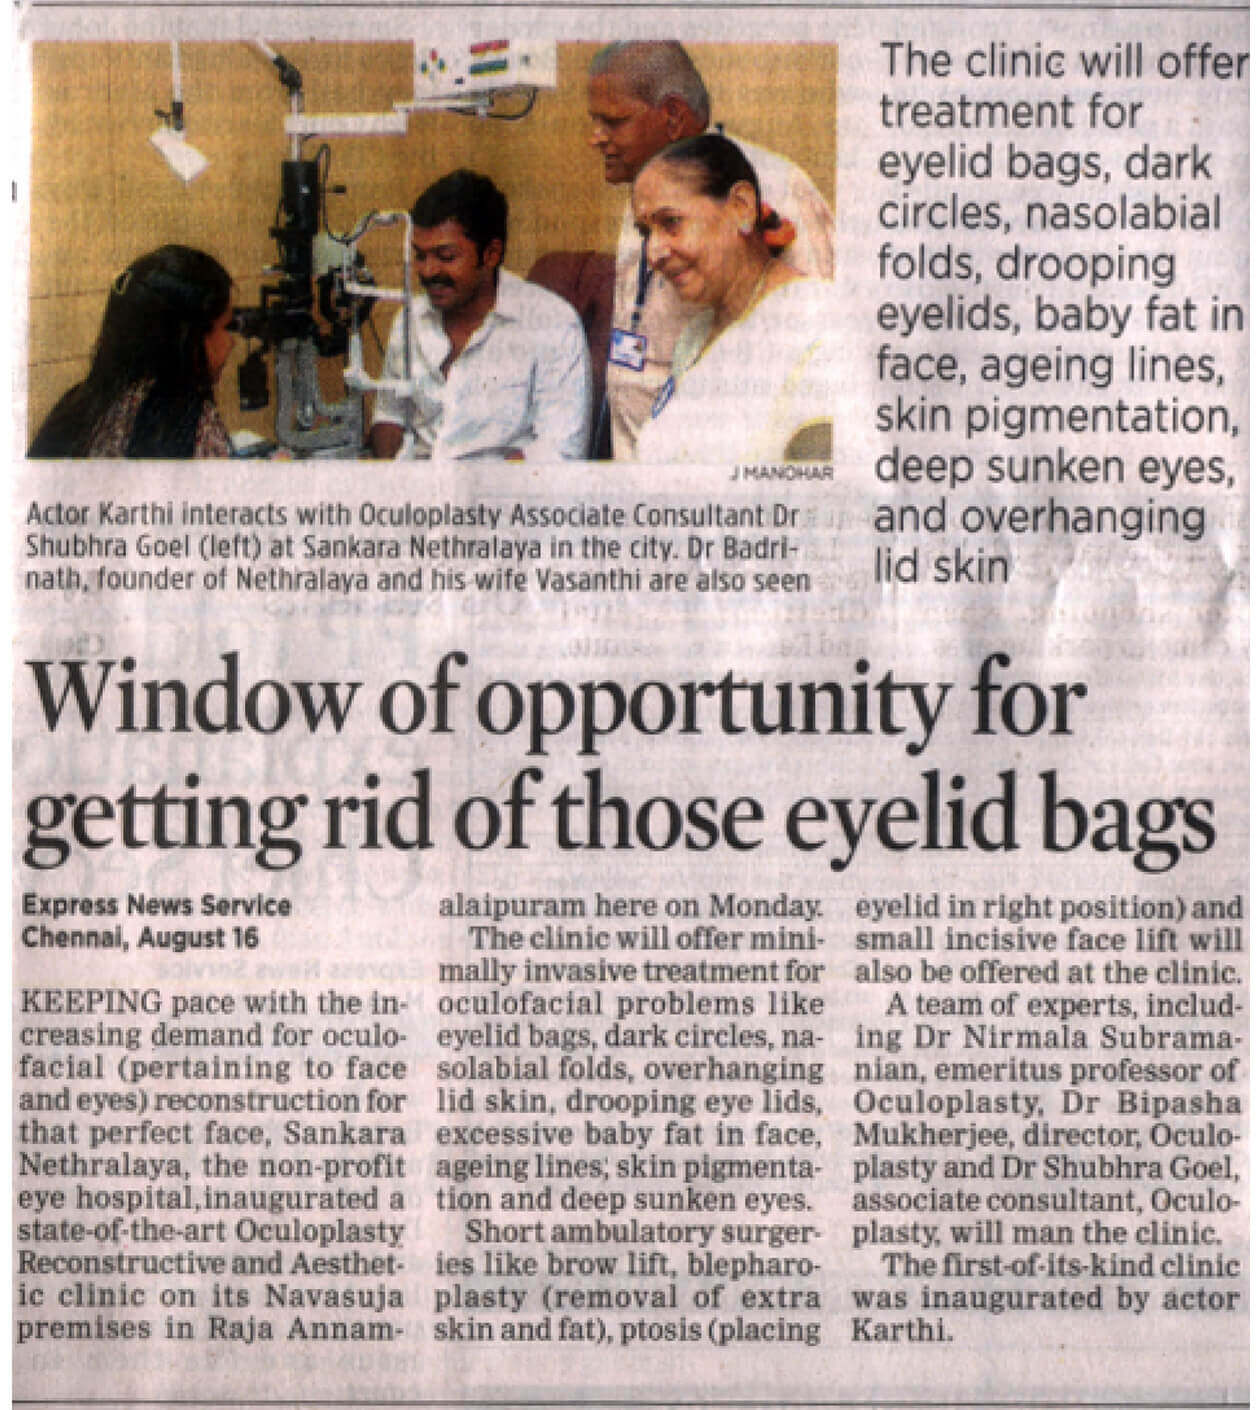 Window of opportunity for getting rid of those eyelid bags